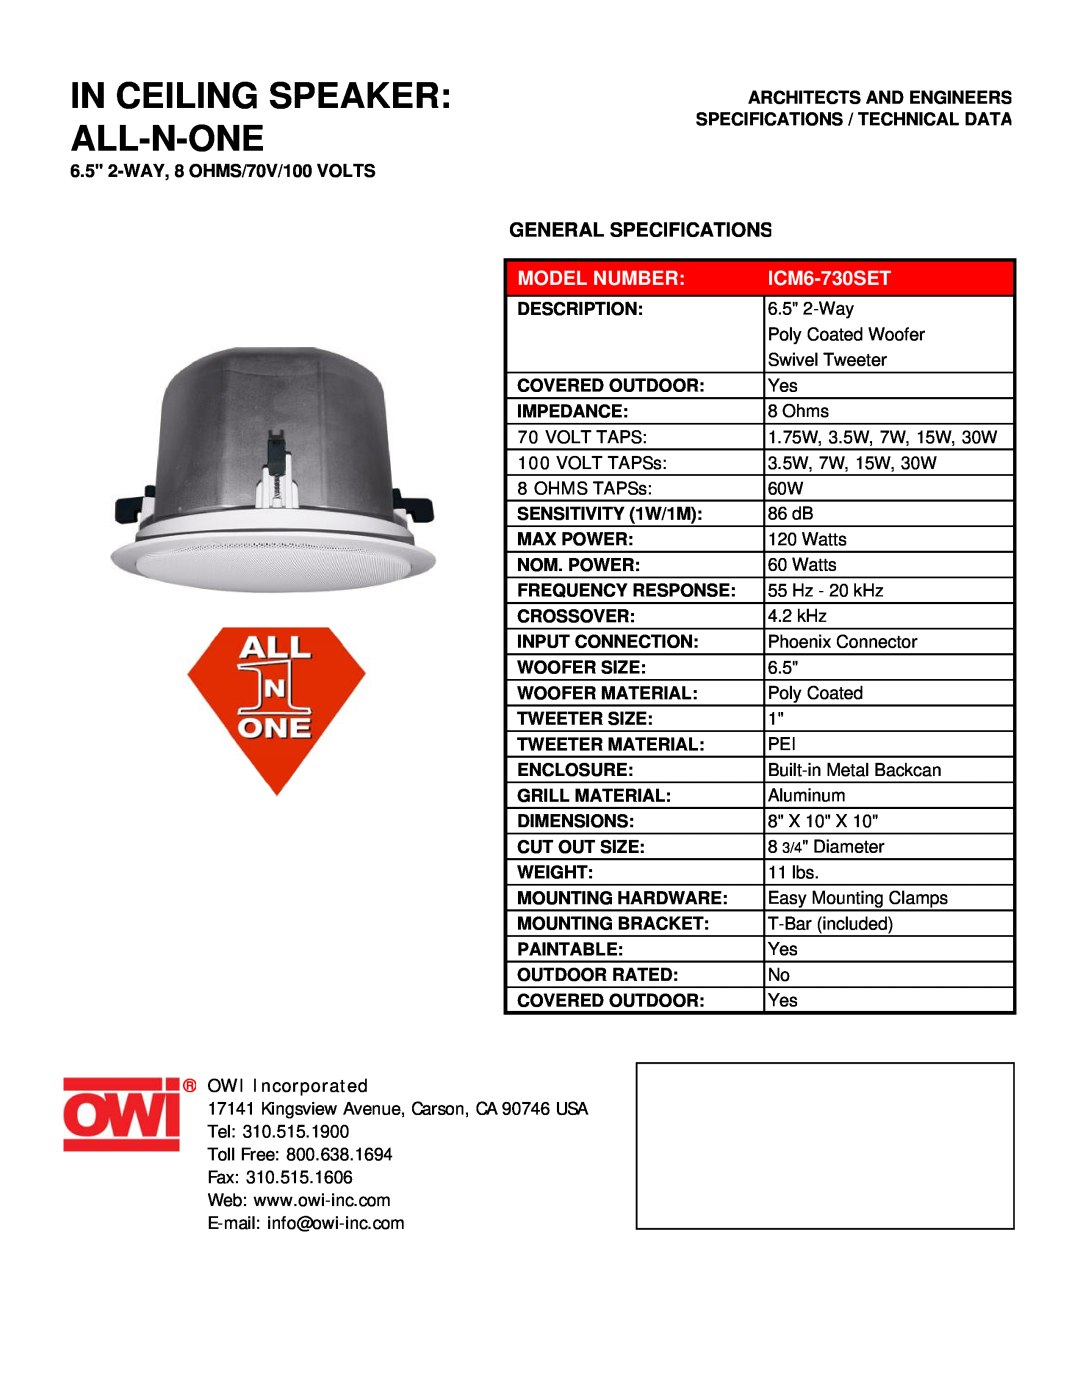 OWI ICM6-730SET specifications In Ceiling Speaker All-N-One, General Specifications, Model Number, Volt Taps, VOLT TAPSs 